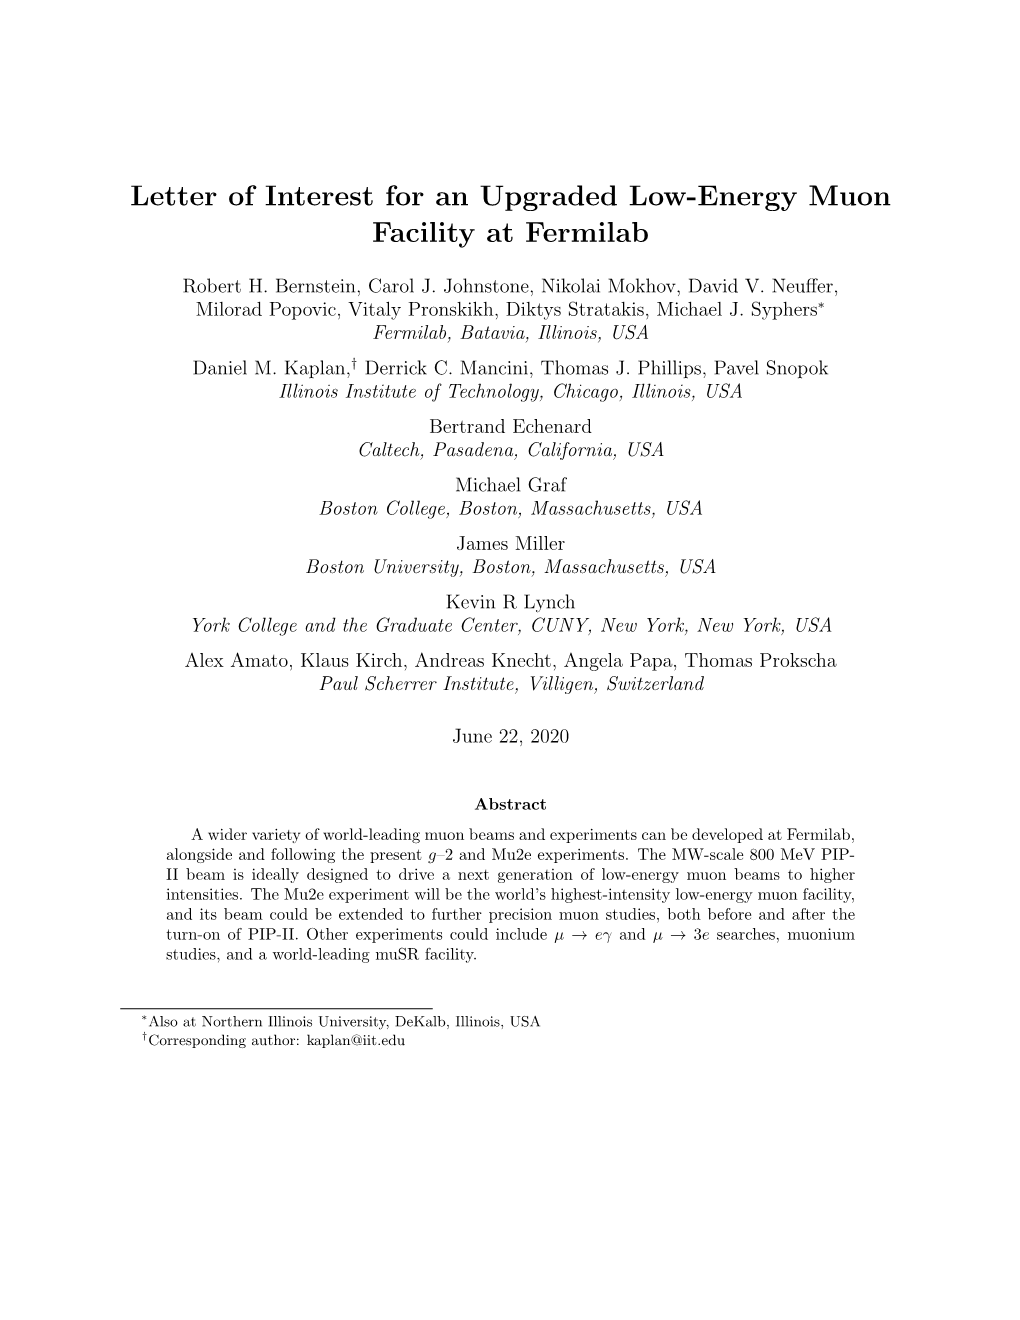 Letter of Interest for an Upgraded Low-Energy Muon Facility at Fermilab